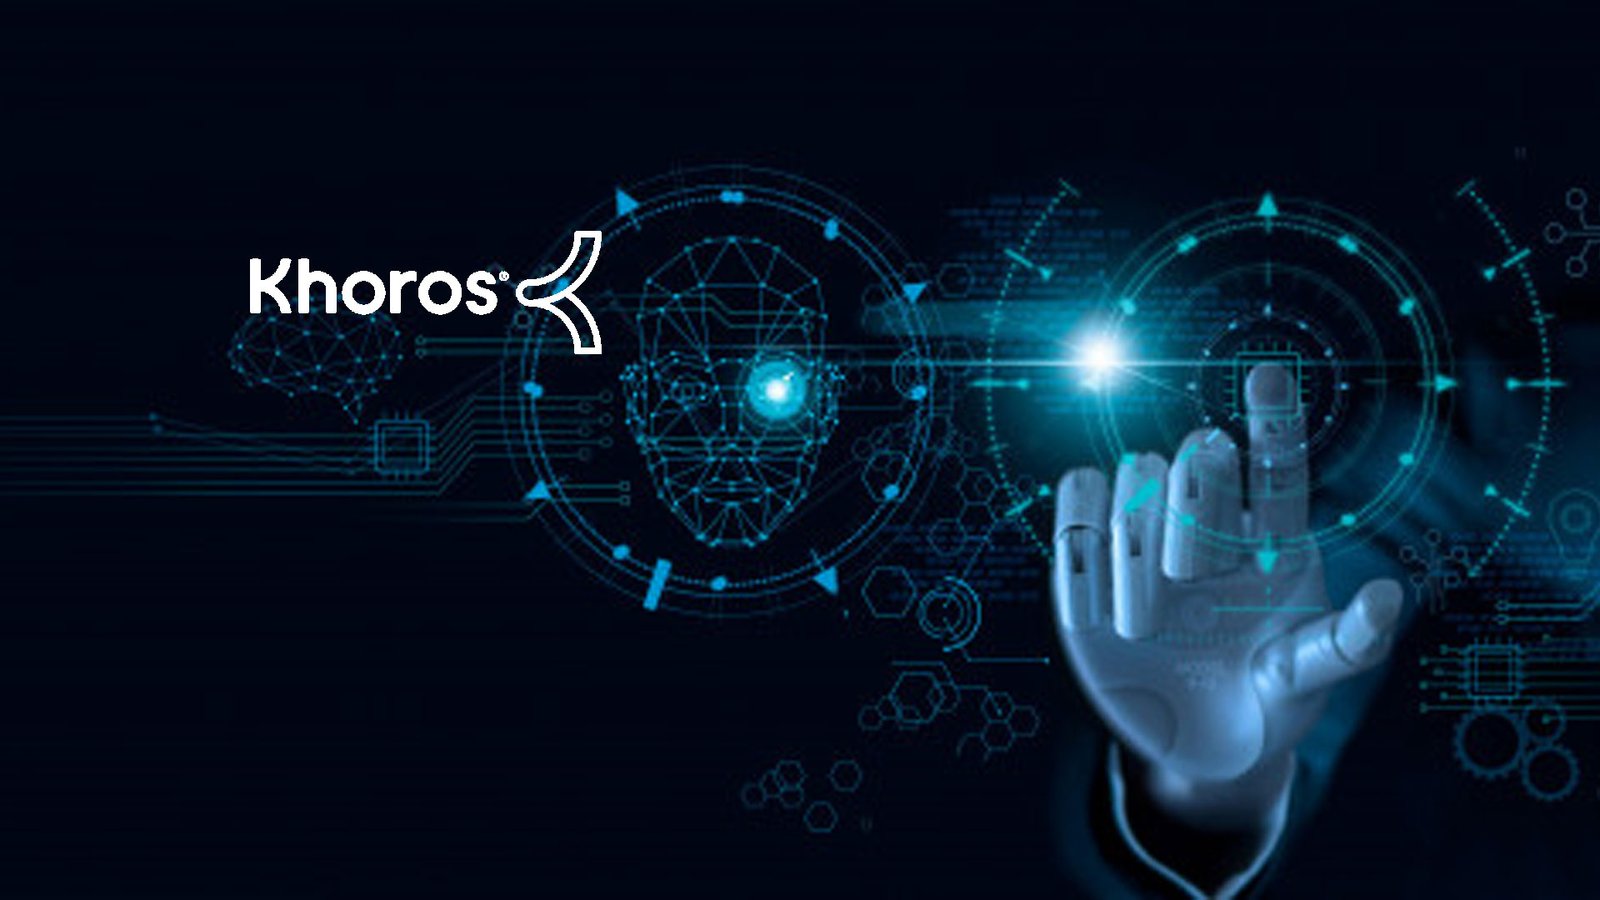 khoros-brings-more-power-to-digital-leaders-with-ml-powered-insights-ai-techpark